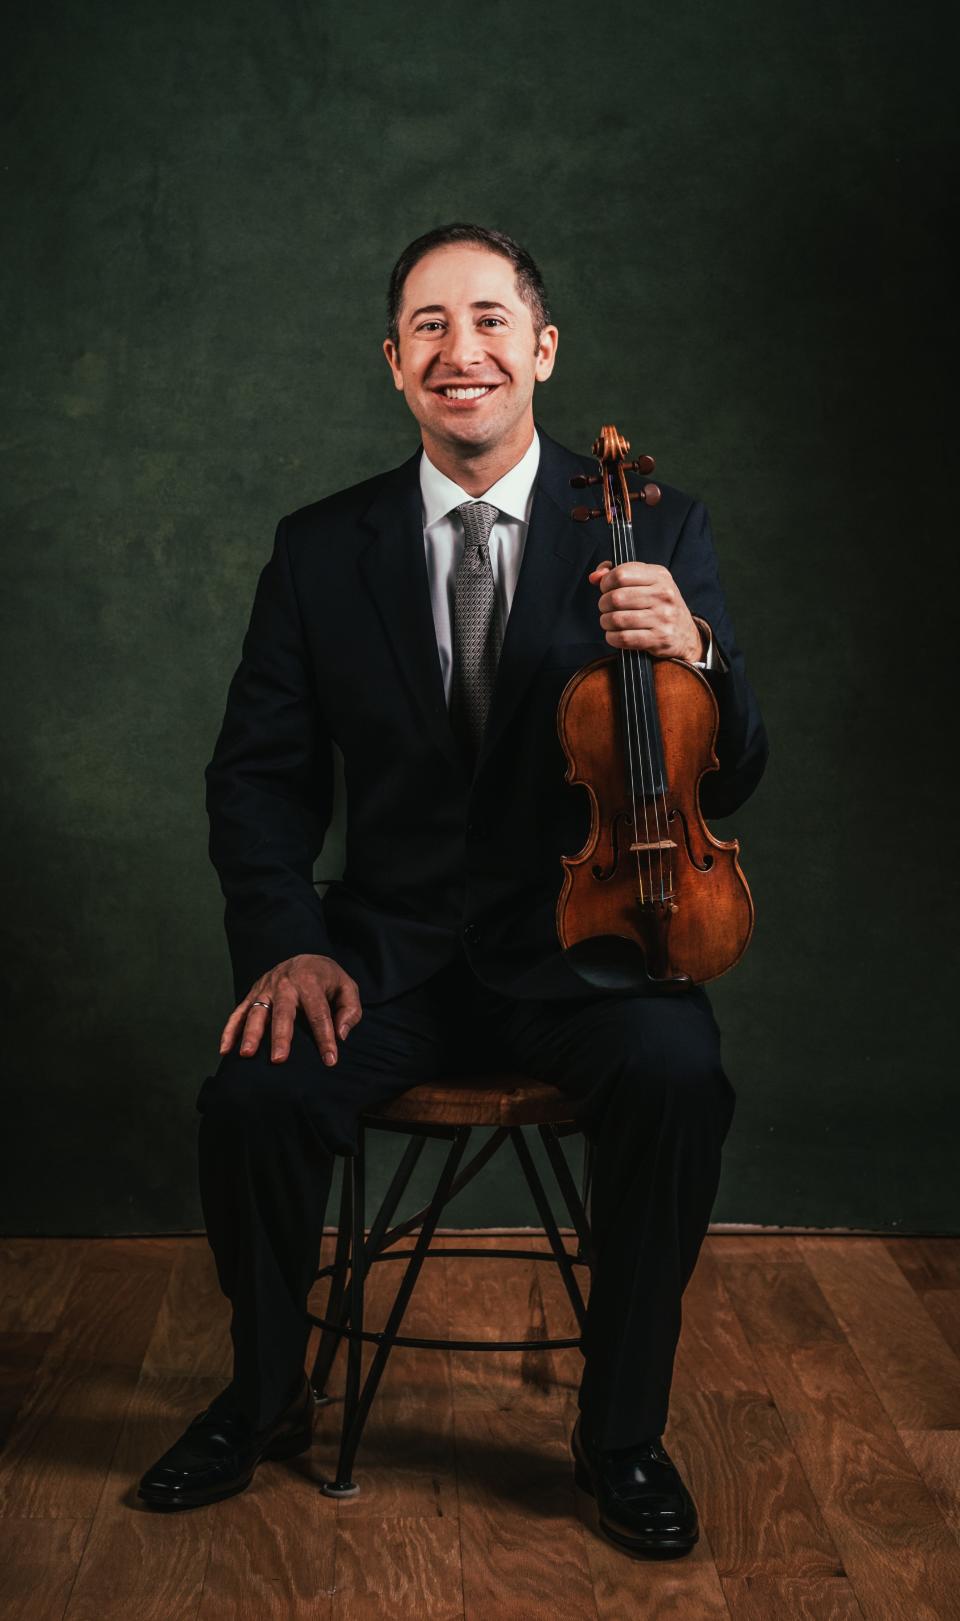 Daniel Jordan, concertmaster of the Sarasota Orchestra, serves as director of artist programs for Artist Series Concerts of Sarasota, for which he planned the 2022-23 season.